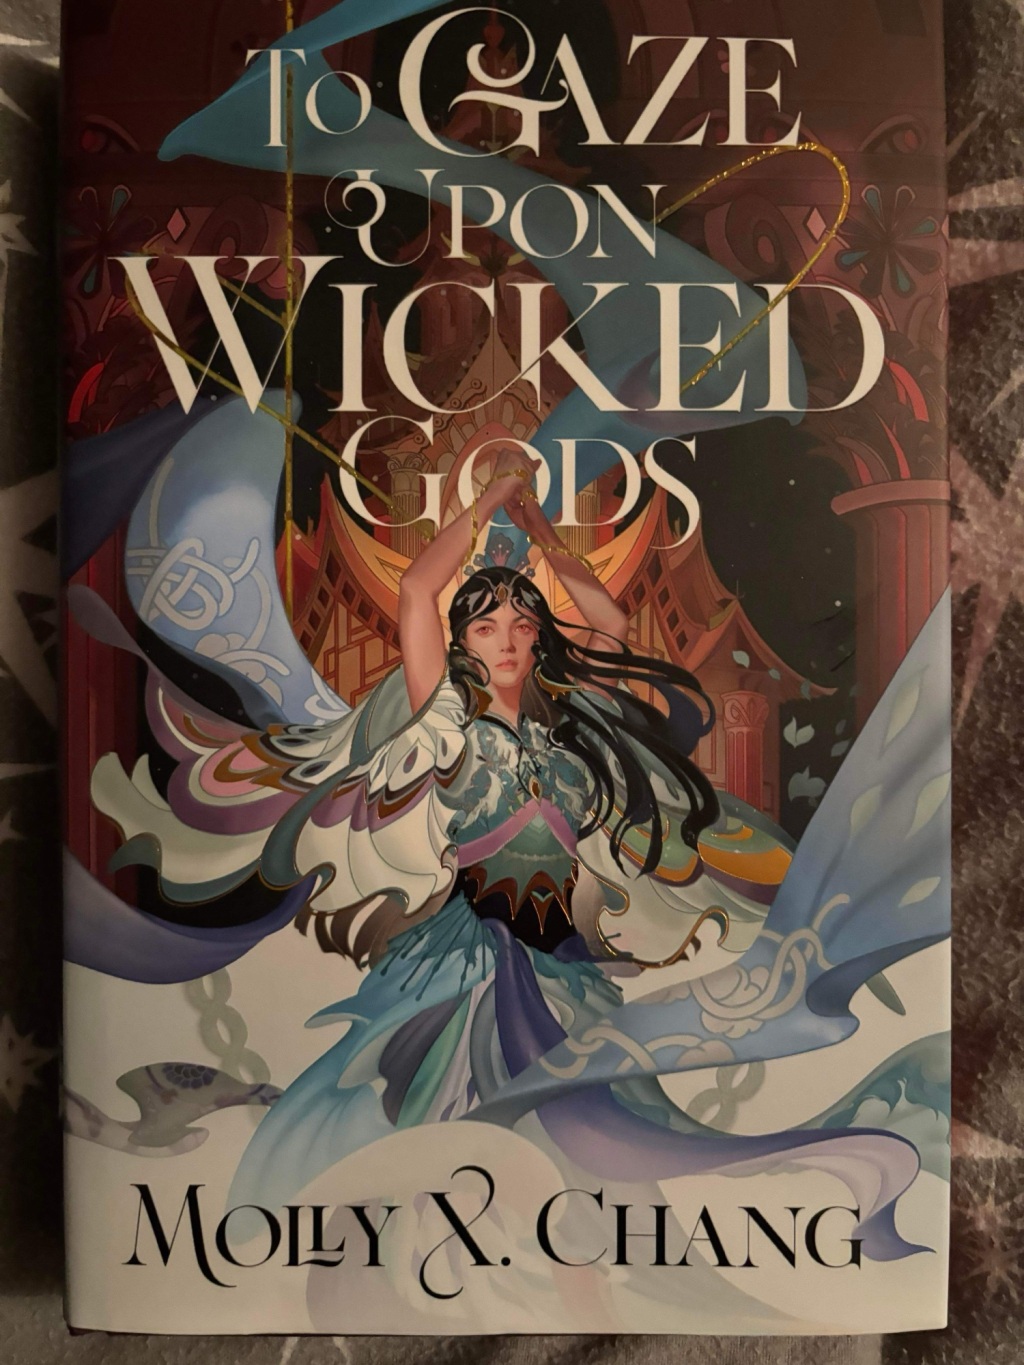 To Gaze Upon Wicked Gods by Molly X. Chang